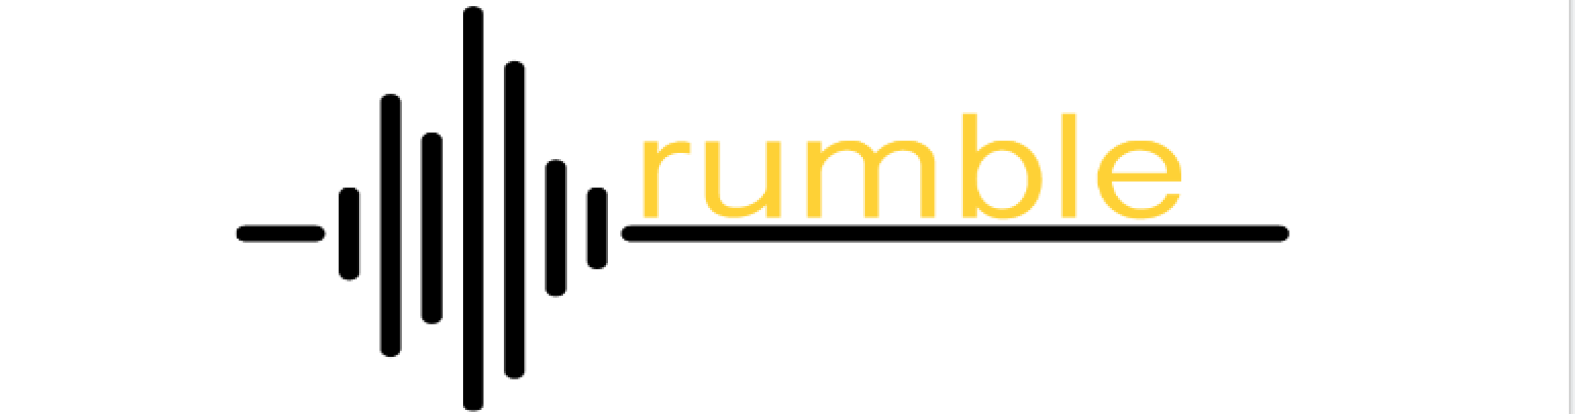 rumble_banner_2.png